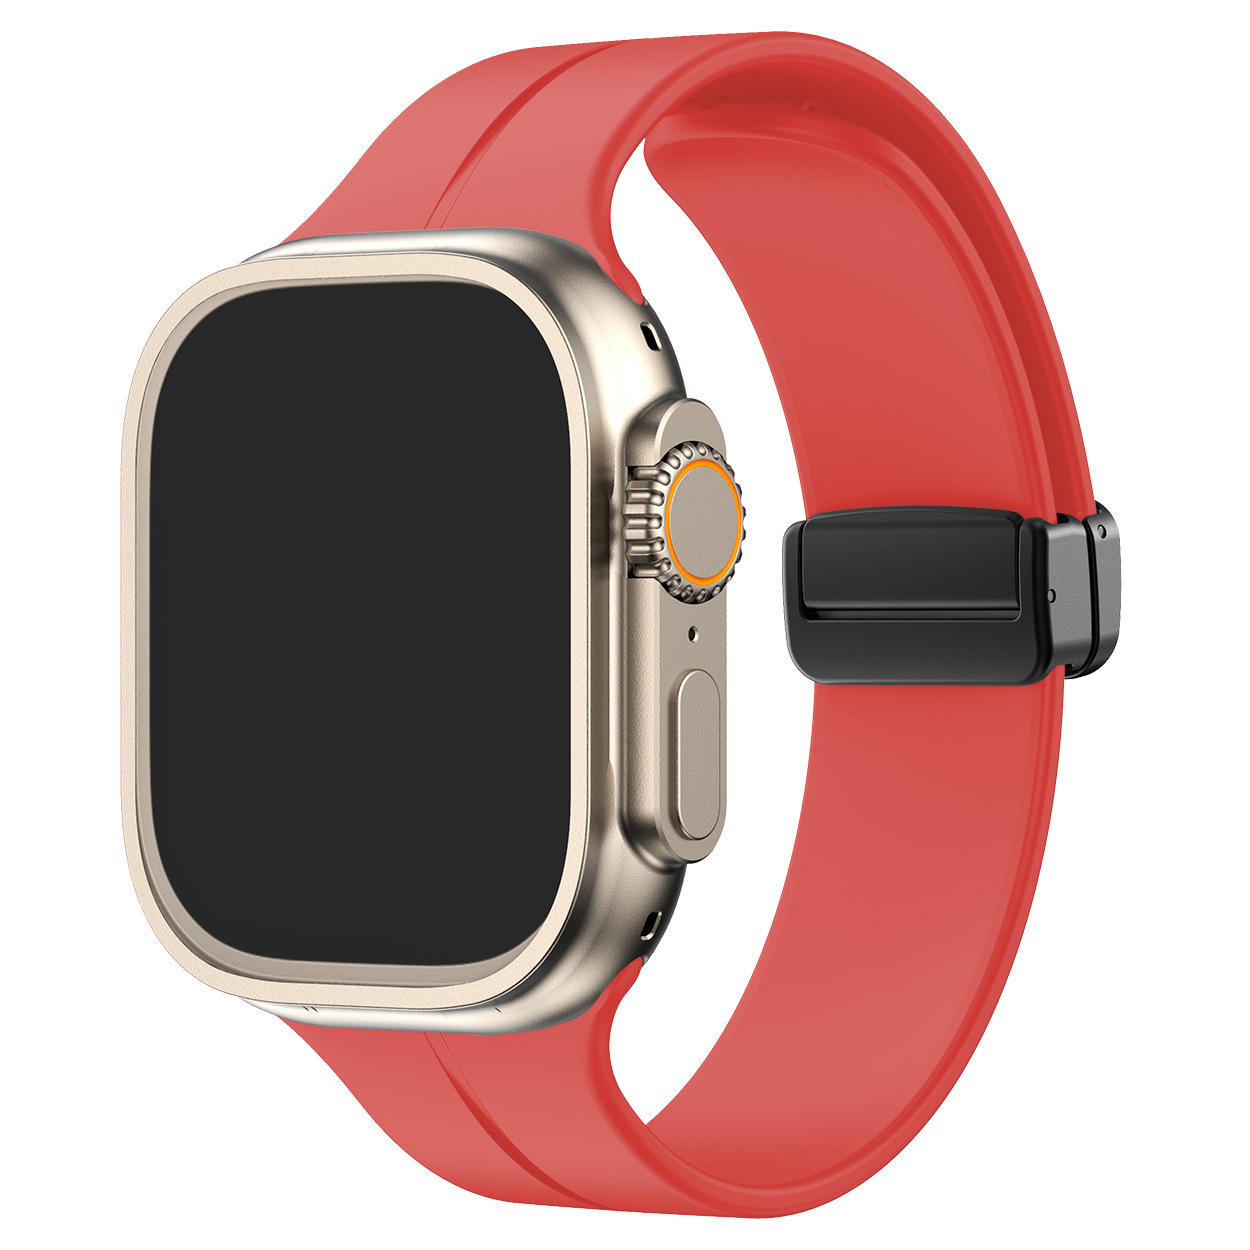 FlexiFit™ Magnetic Band for Apple Watch - BUY 1 GET 1 FREE!